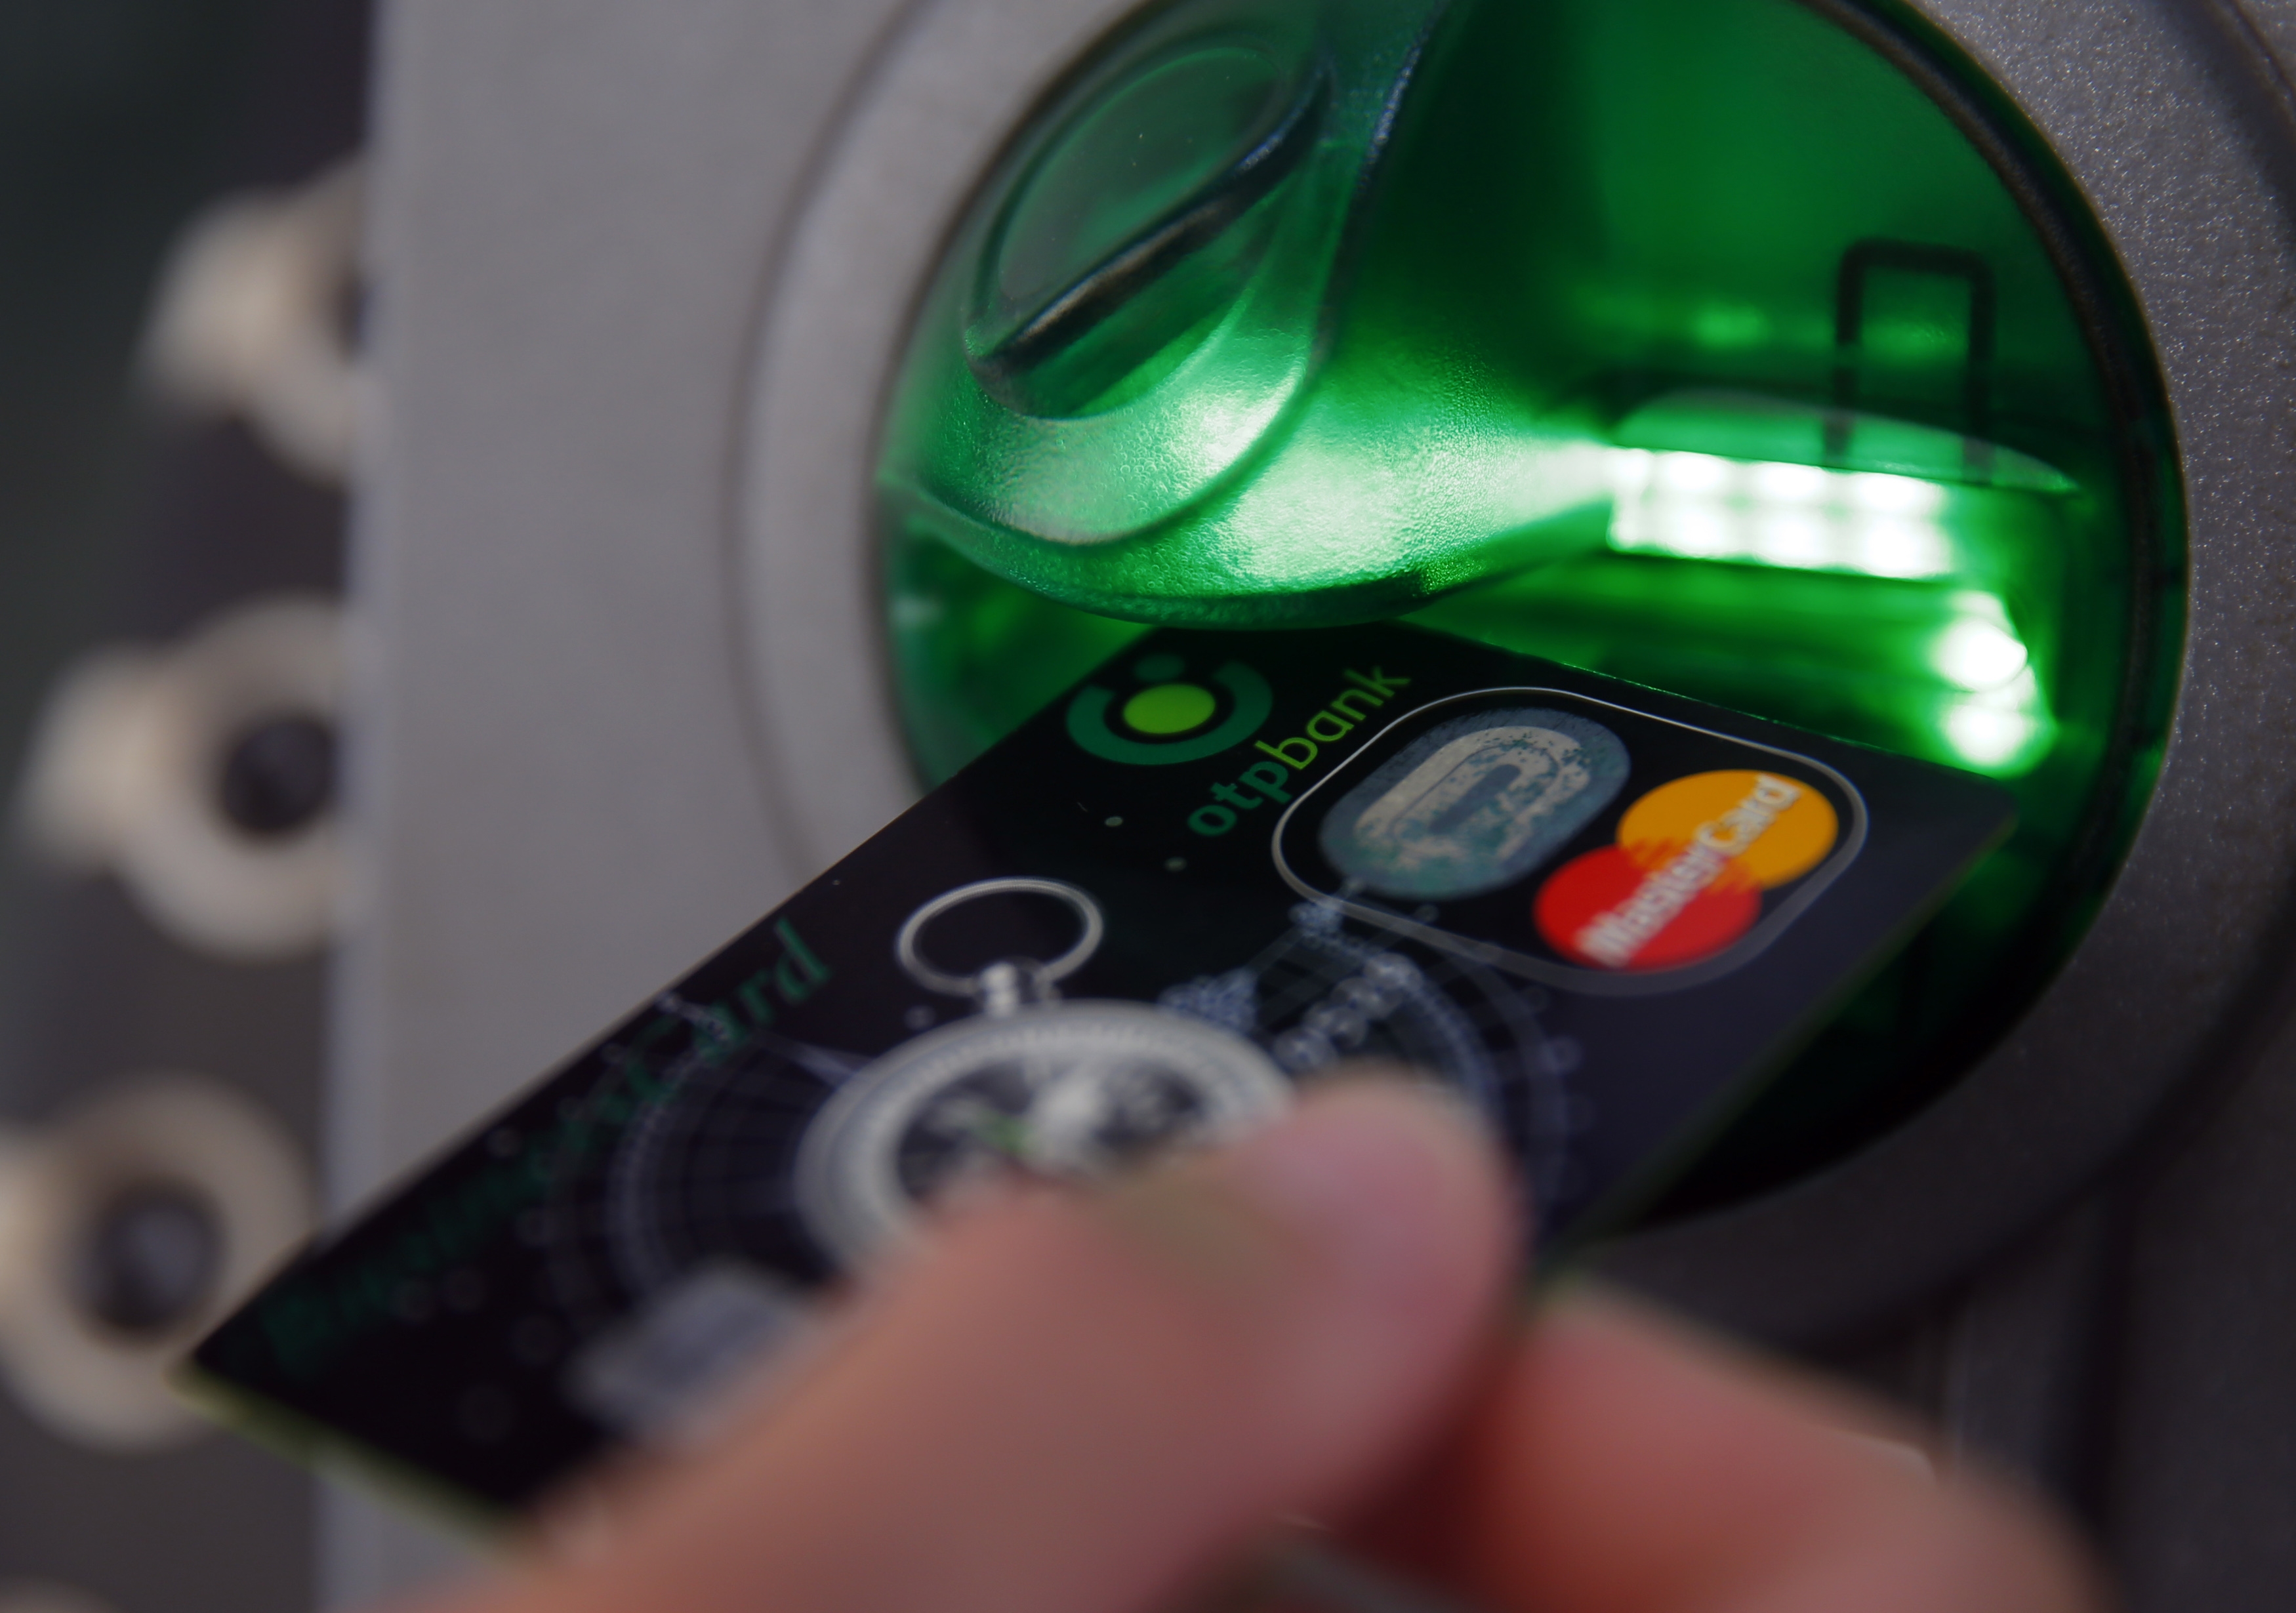 WSJ Senior Writer Robin Sidel and FICO Product Manager John Buzzard discuss the ways scammers are stealing ATM and debit card data.